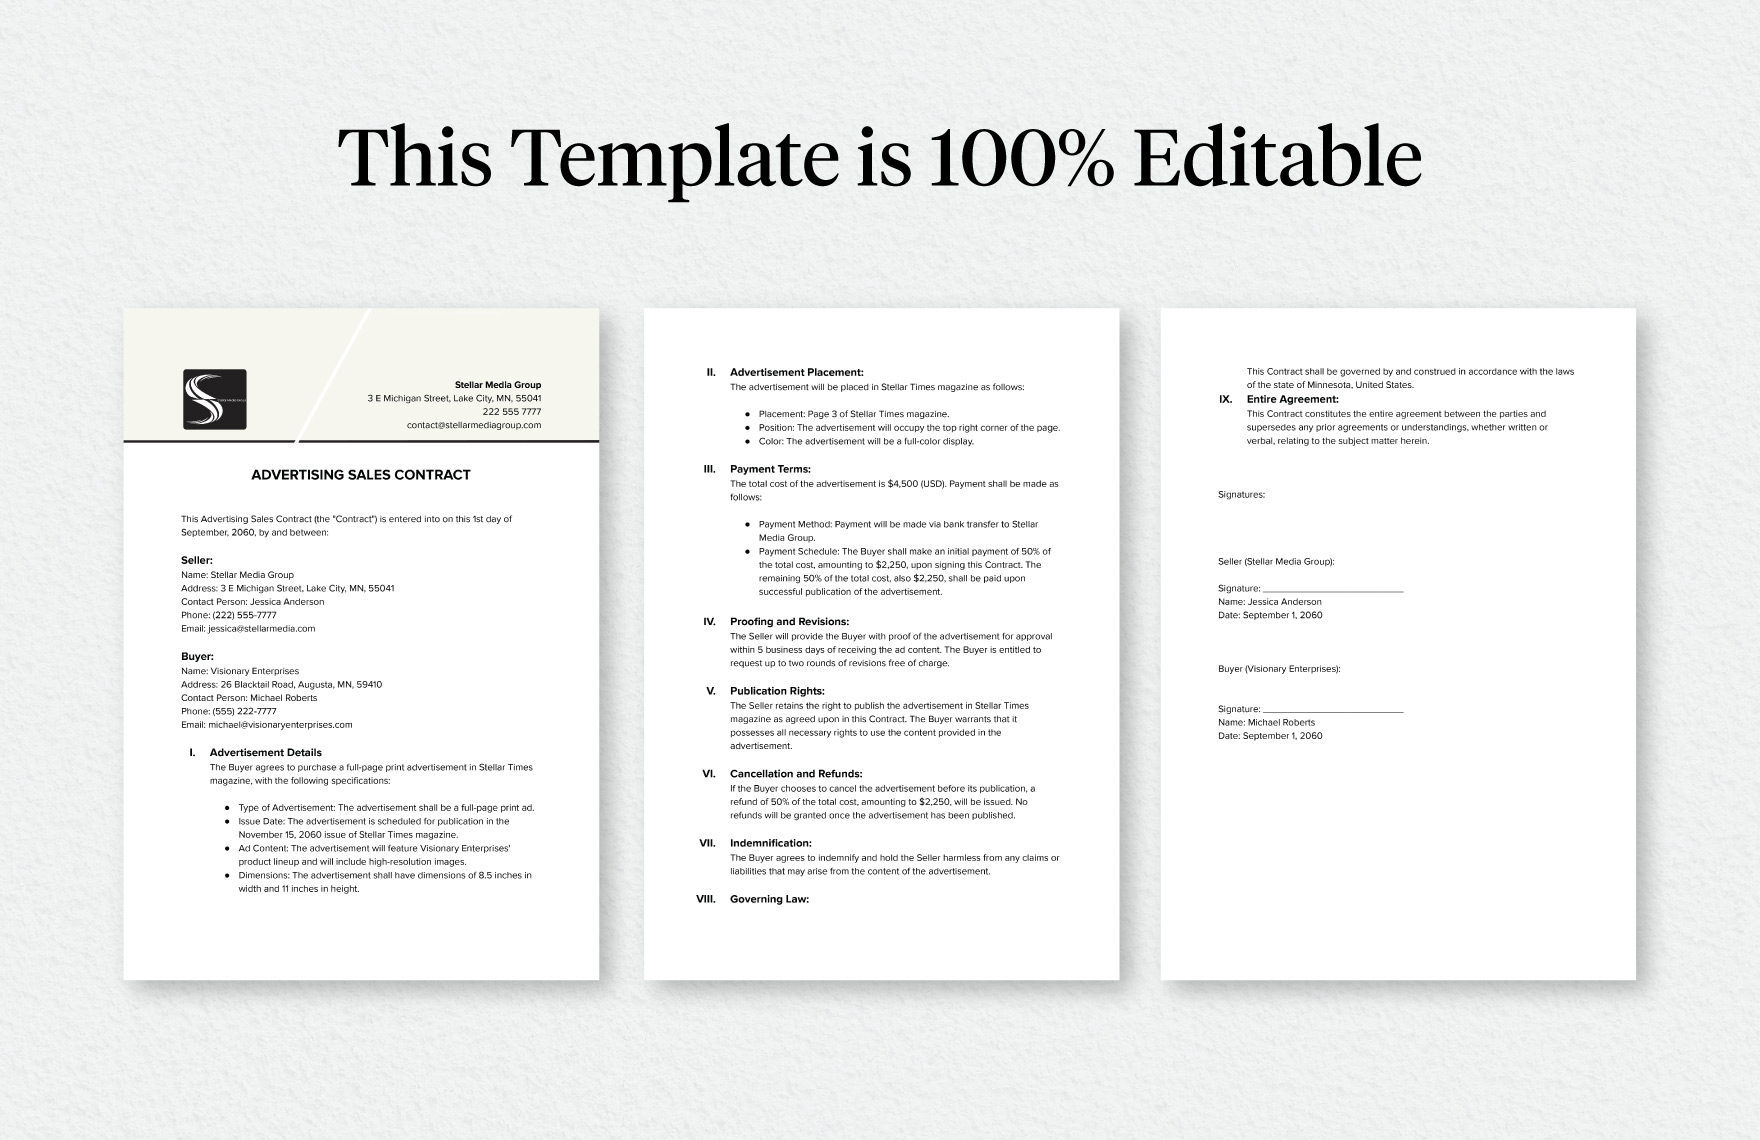 Advertising Sales Contract Template